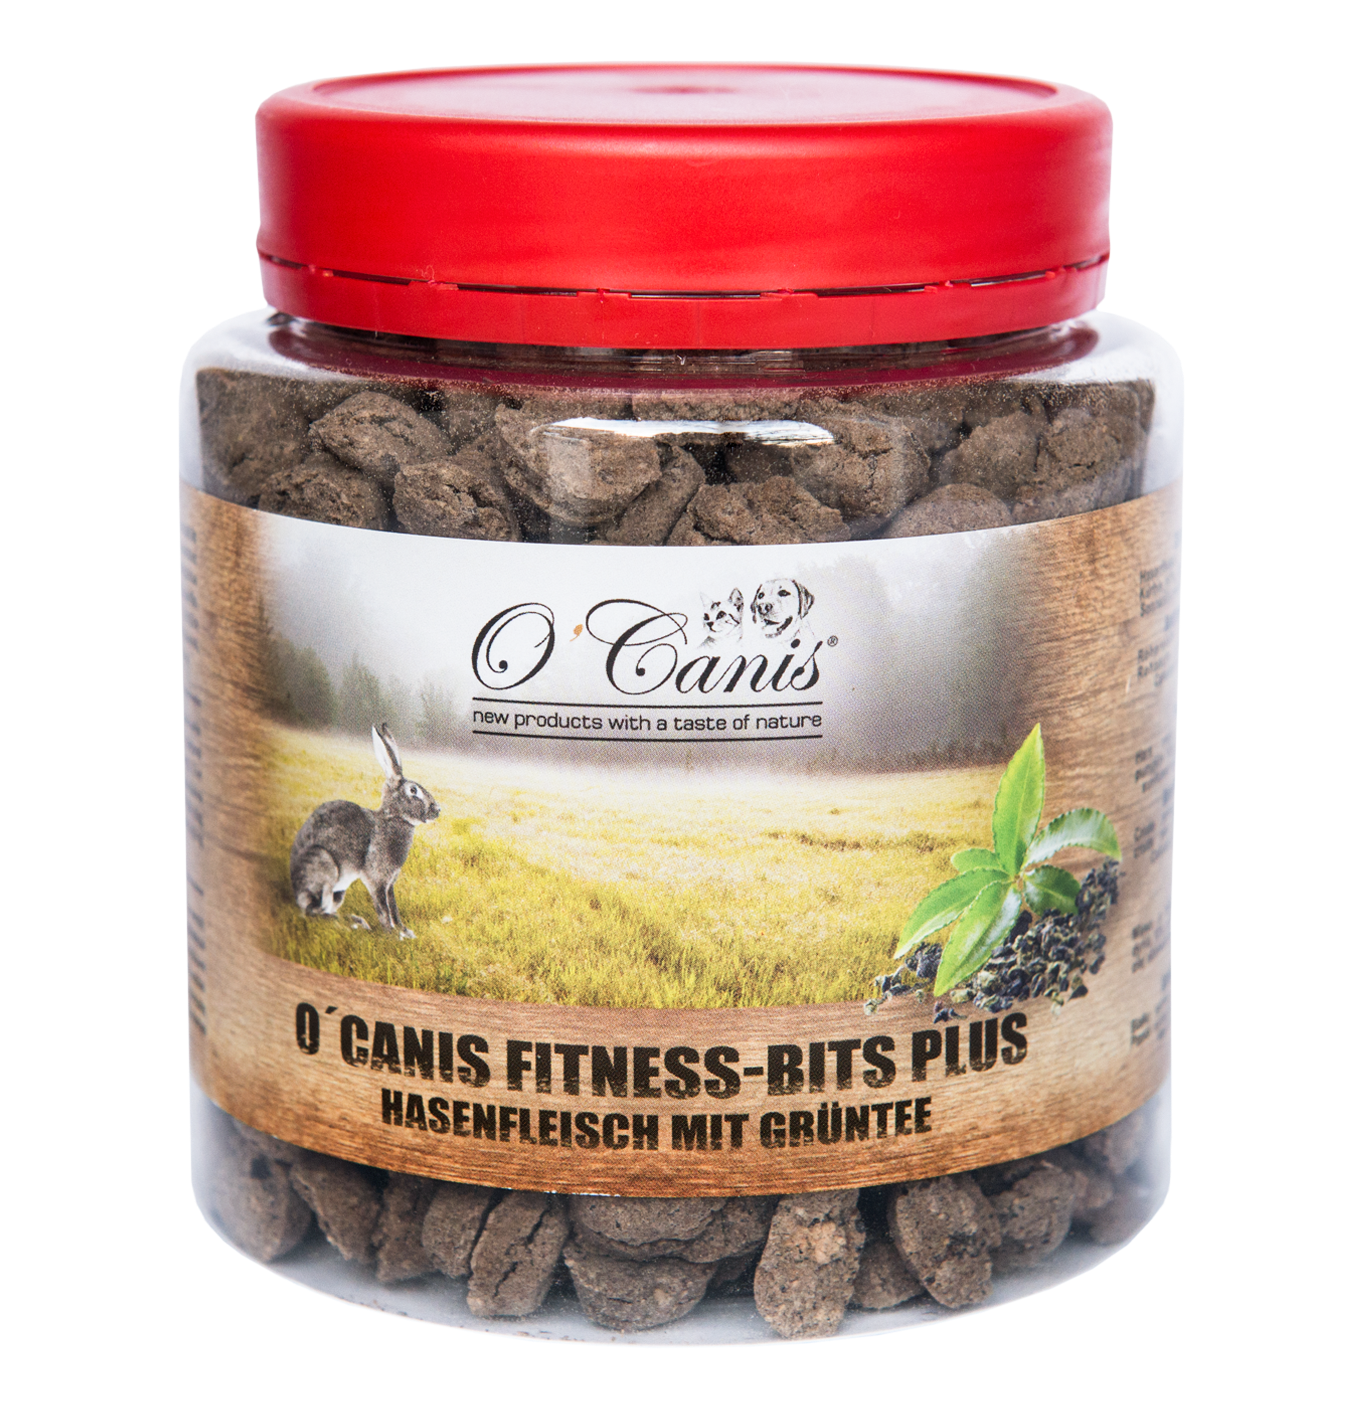 O'Canis - Fitness Bits PLUS "Hase mit Grüntee" 300g